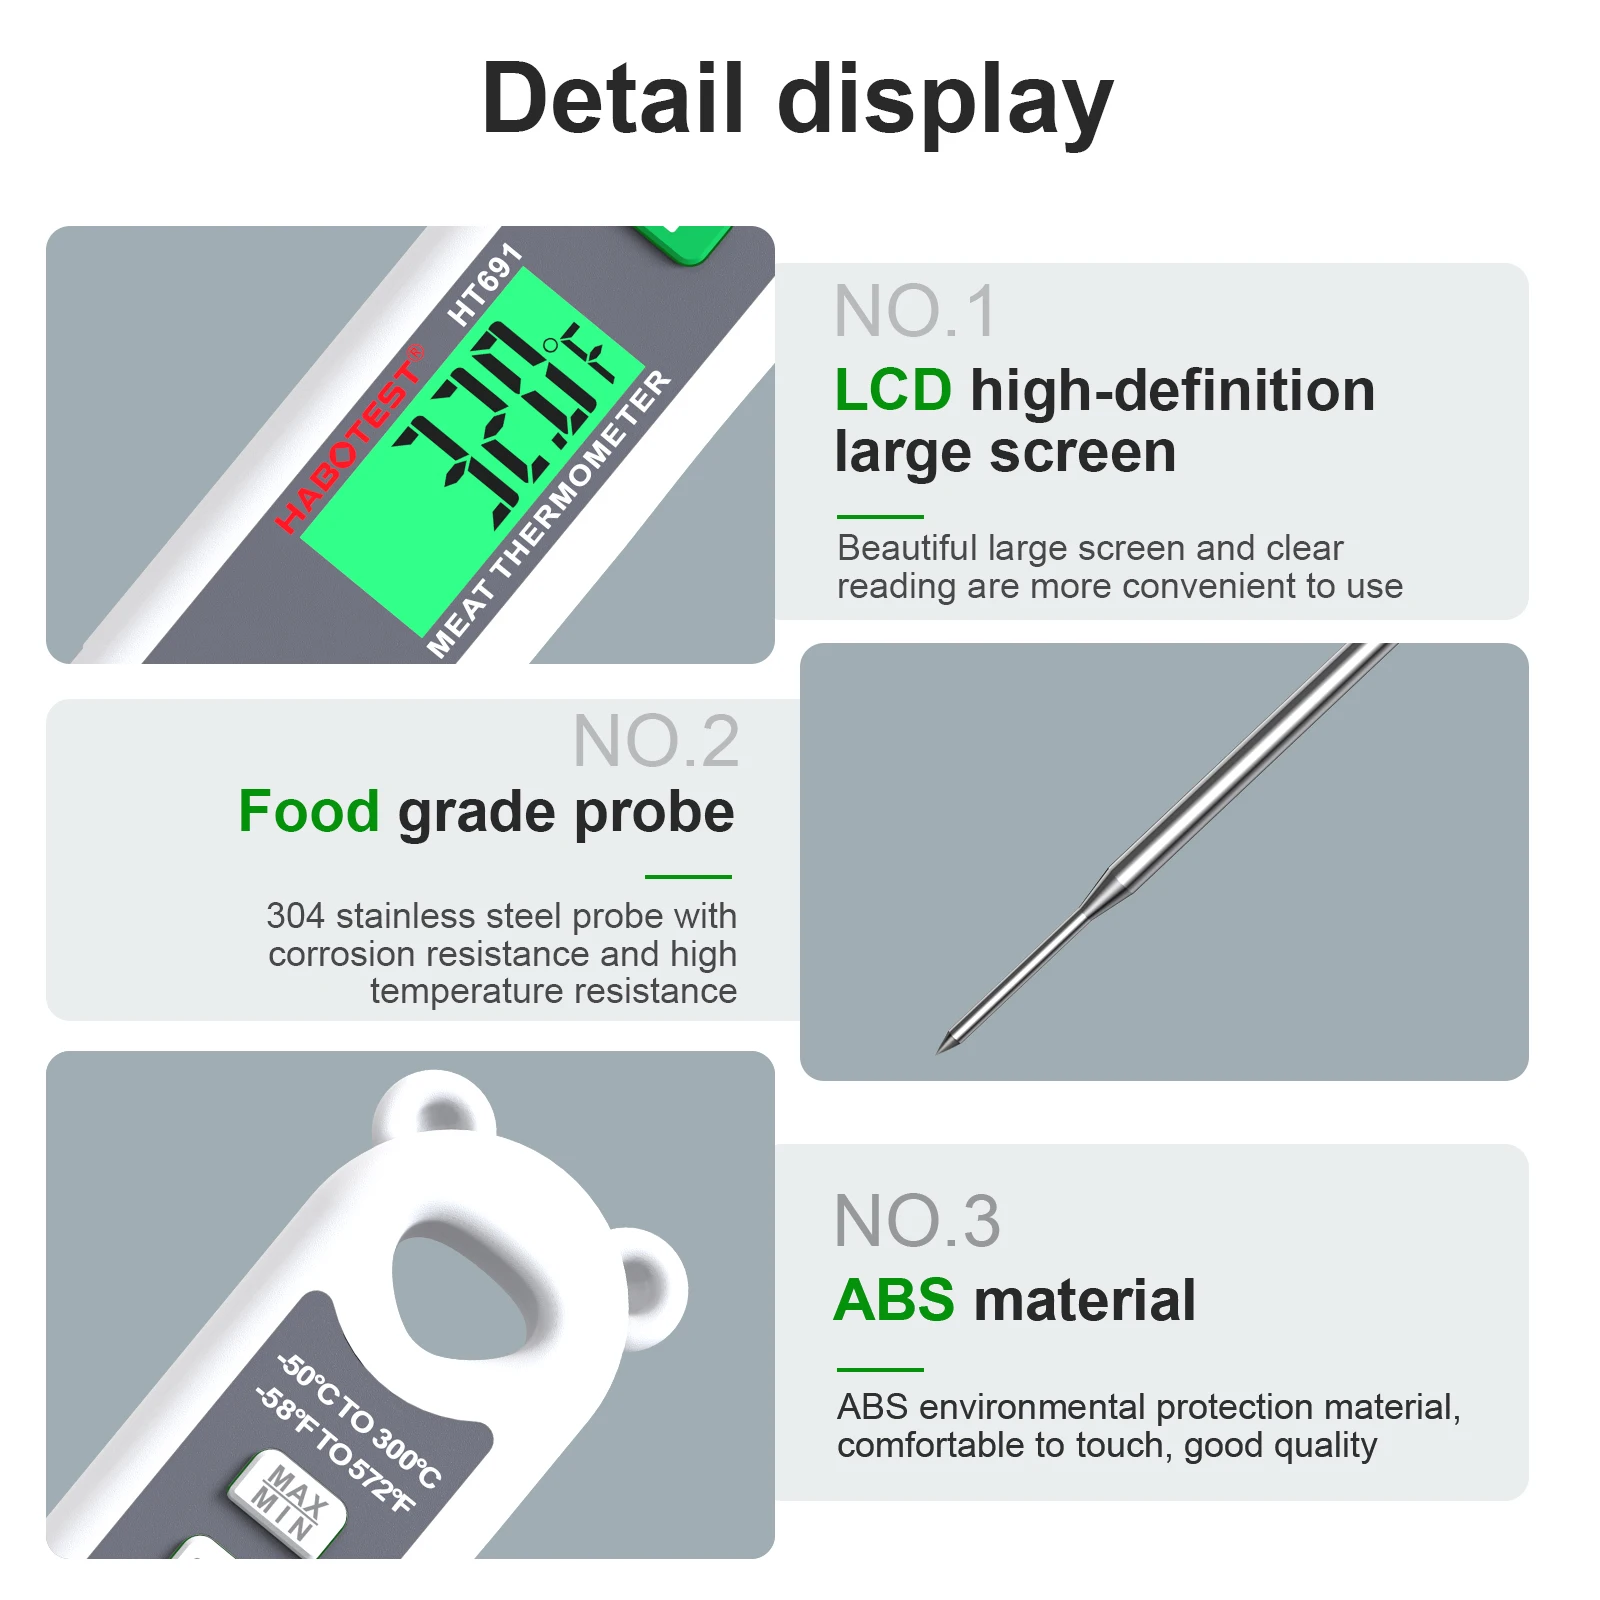 https://ae01.alicdn.com/kf/Se1578c35fd384da4a3e8b0b7963f94e9V/HABOTEST-Instant-Read-Meat-Thermometer-Digital-Kitchen-Cooking-Food-Candy-Thermometer-for-Oil-Deep-Fry-BBQ.jpg